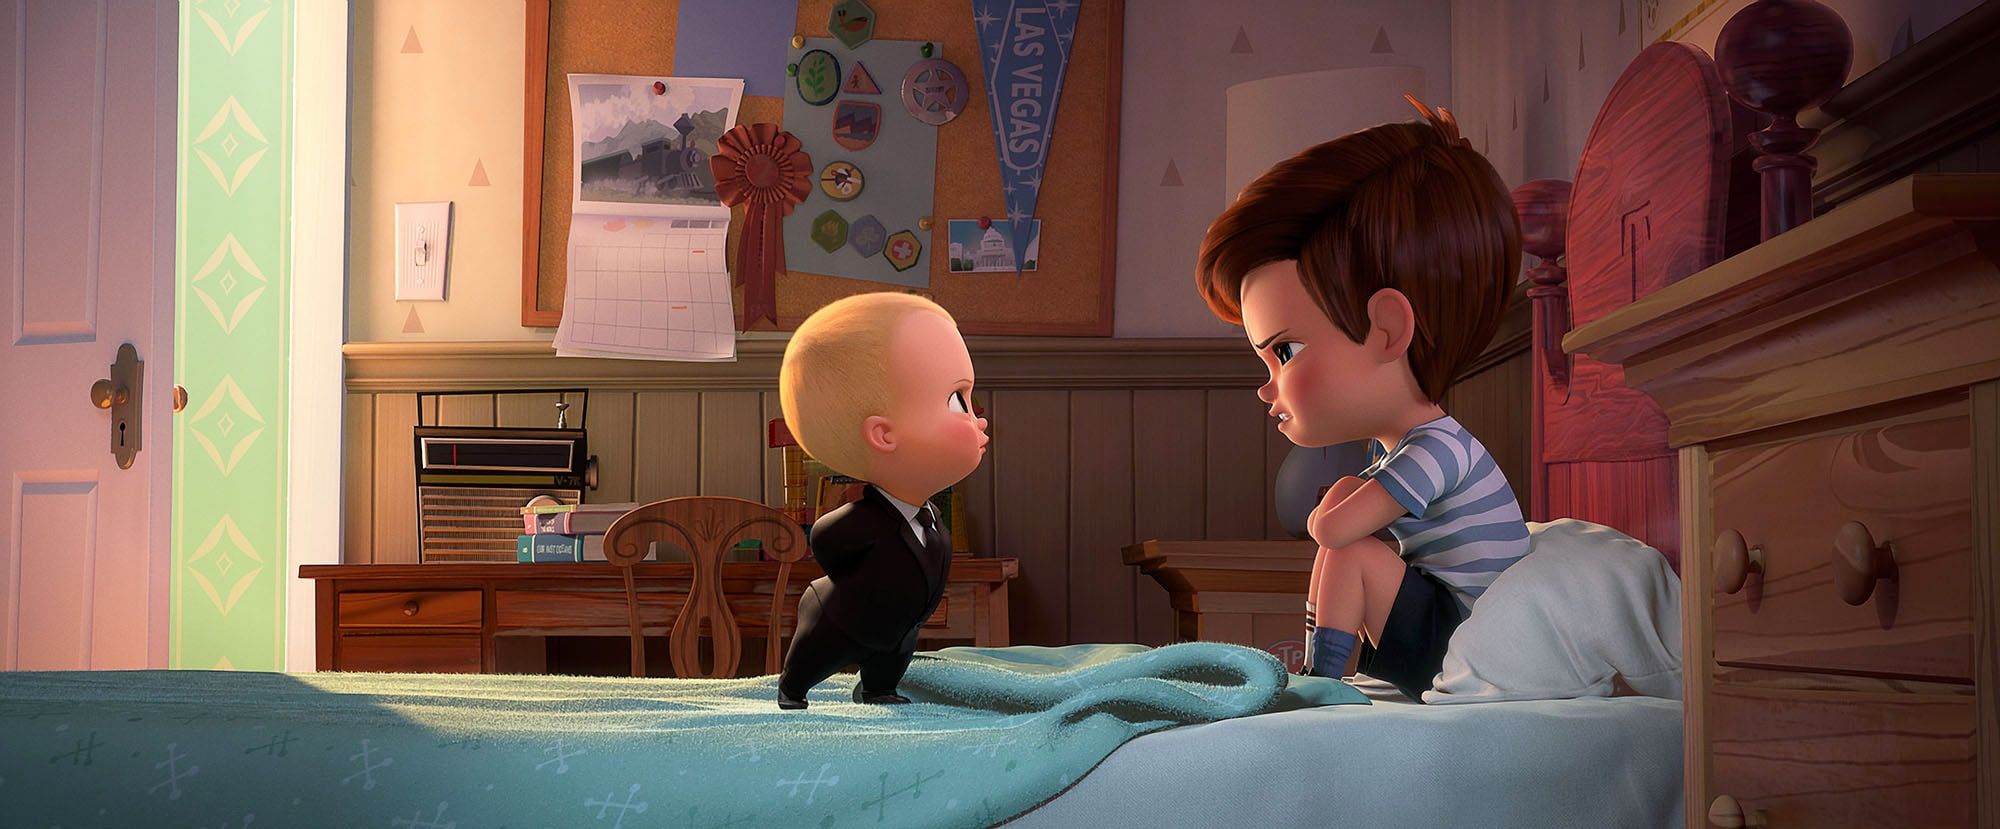 The Boss Baby': Grown Up Life Lessons In A Family Friendly Animated Comedy Washington Post